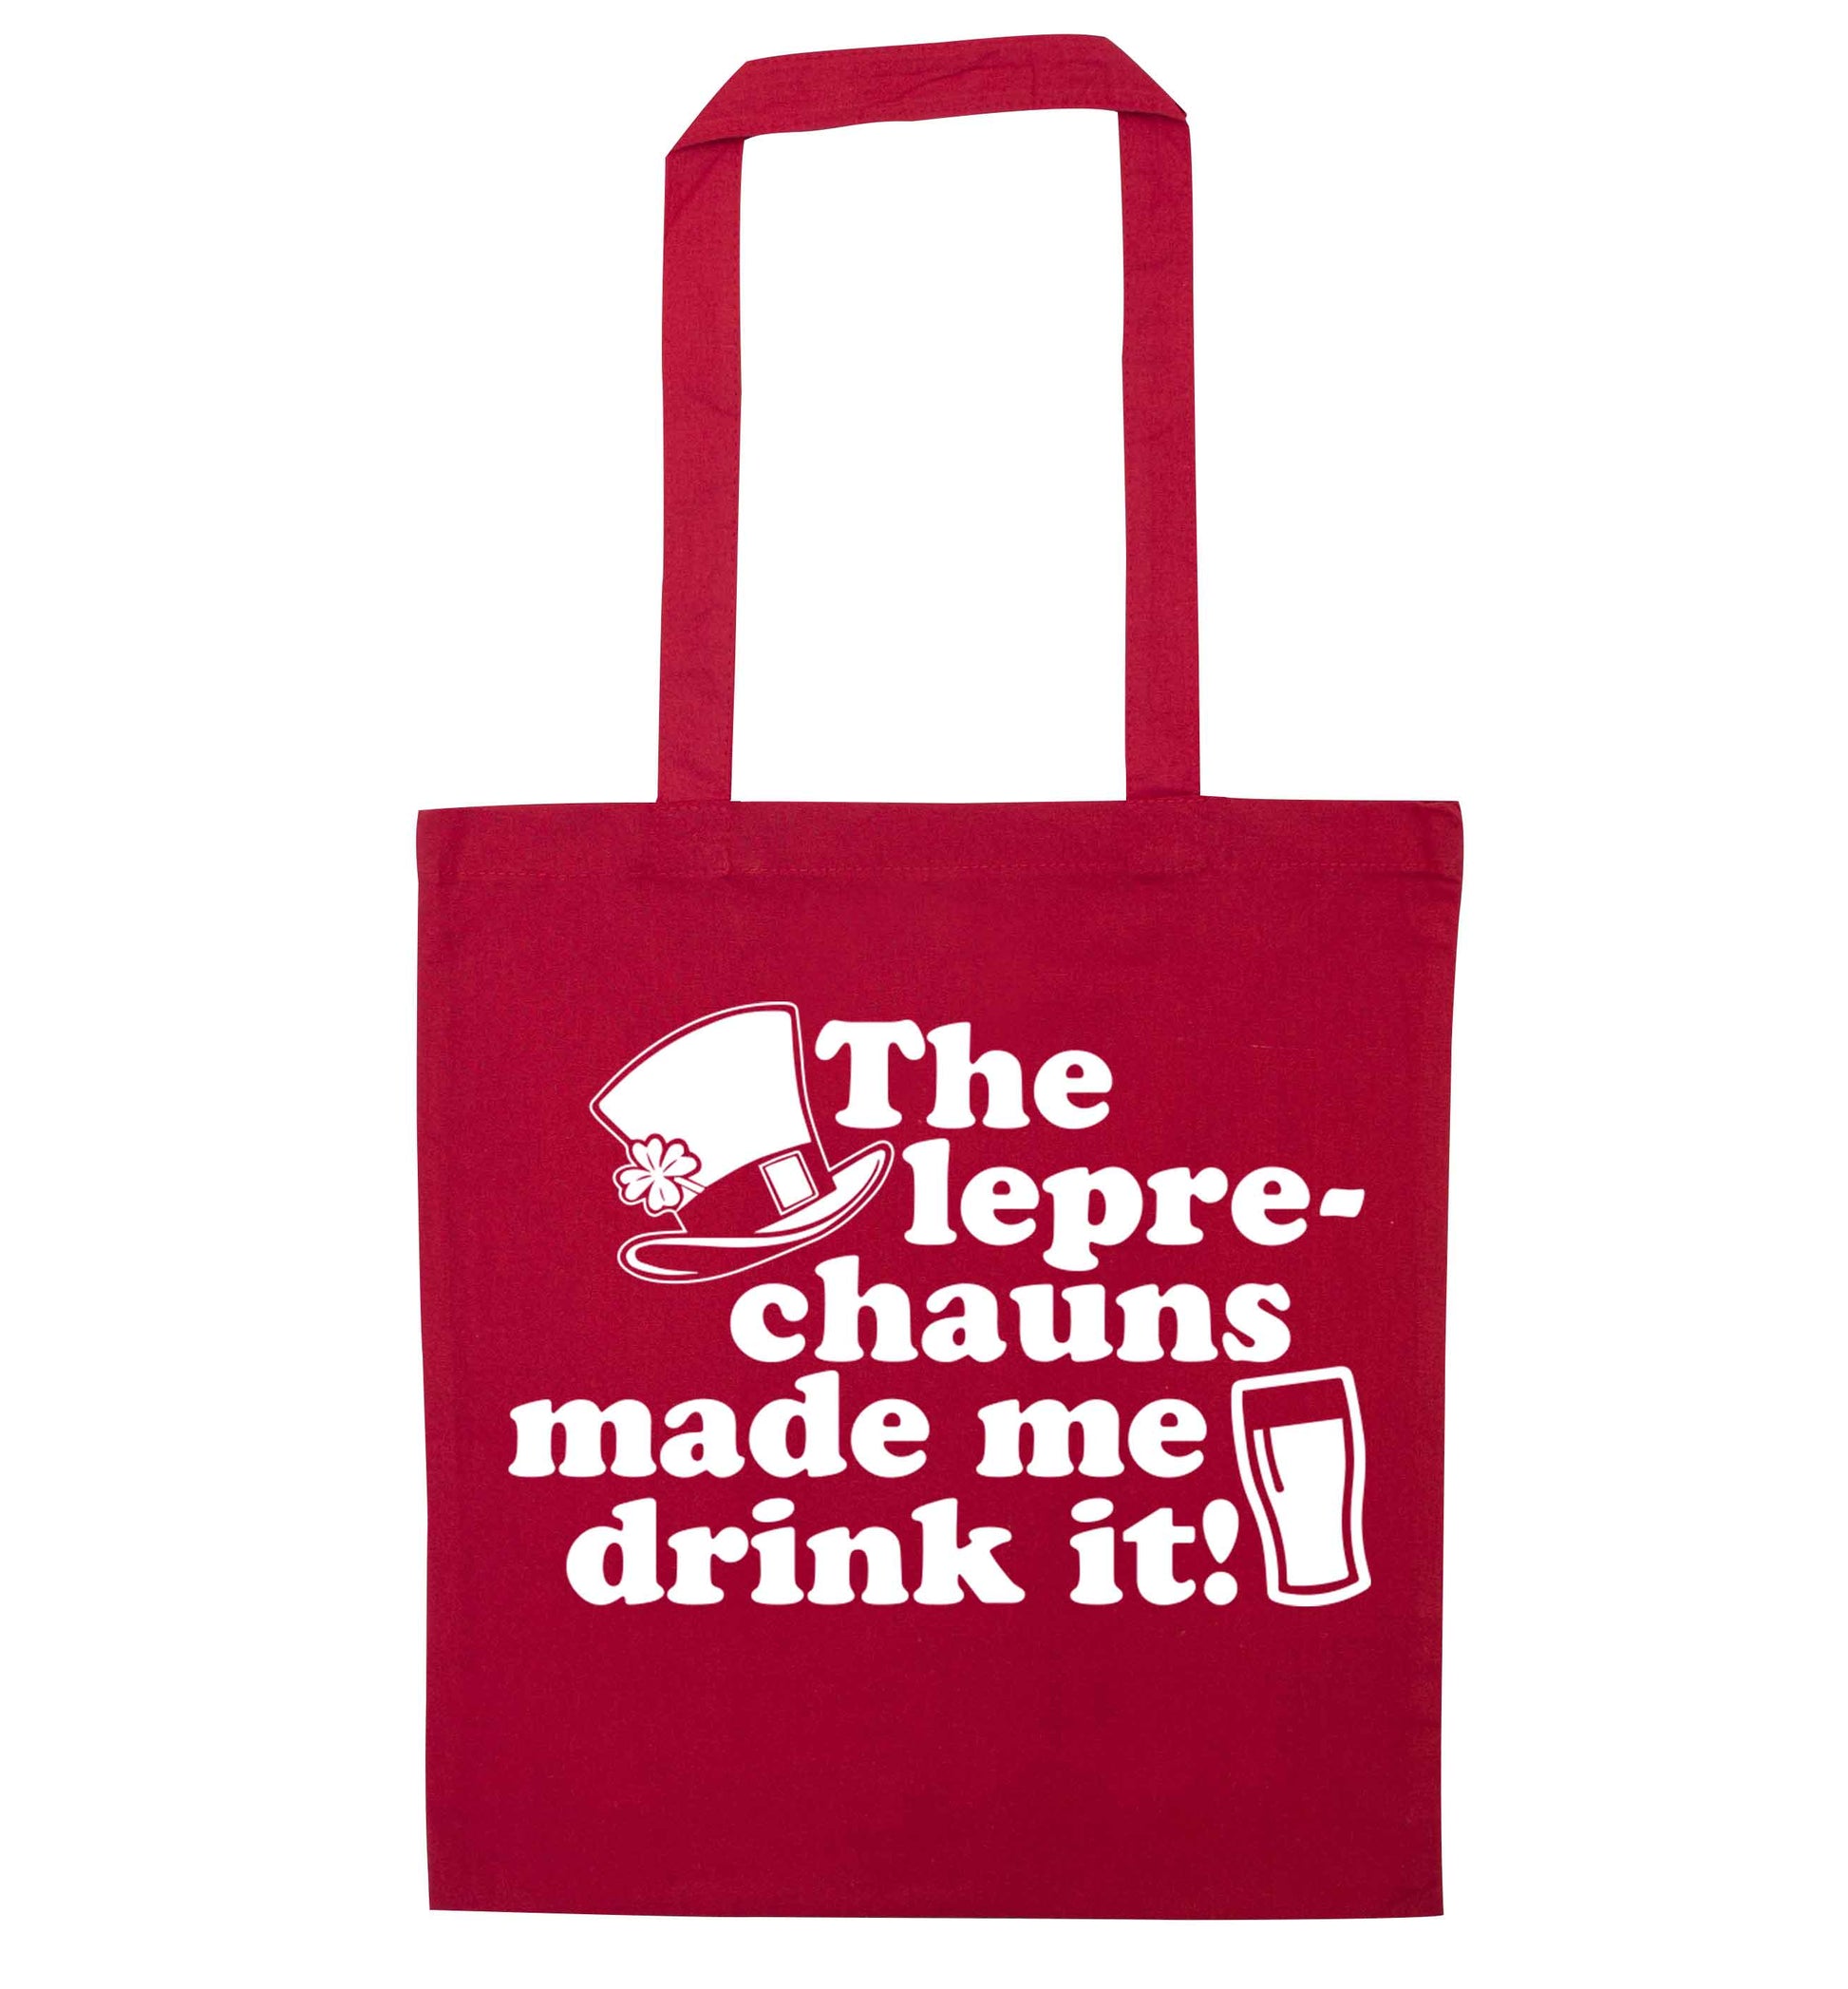 The leprechauns made me drink it red tote bag